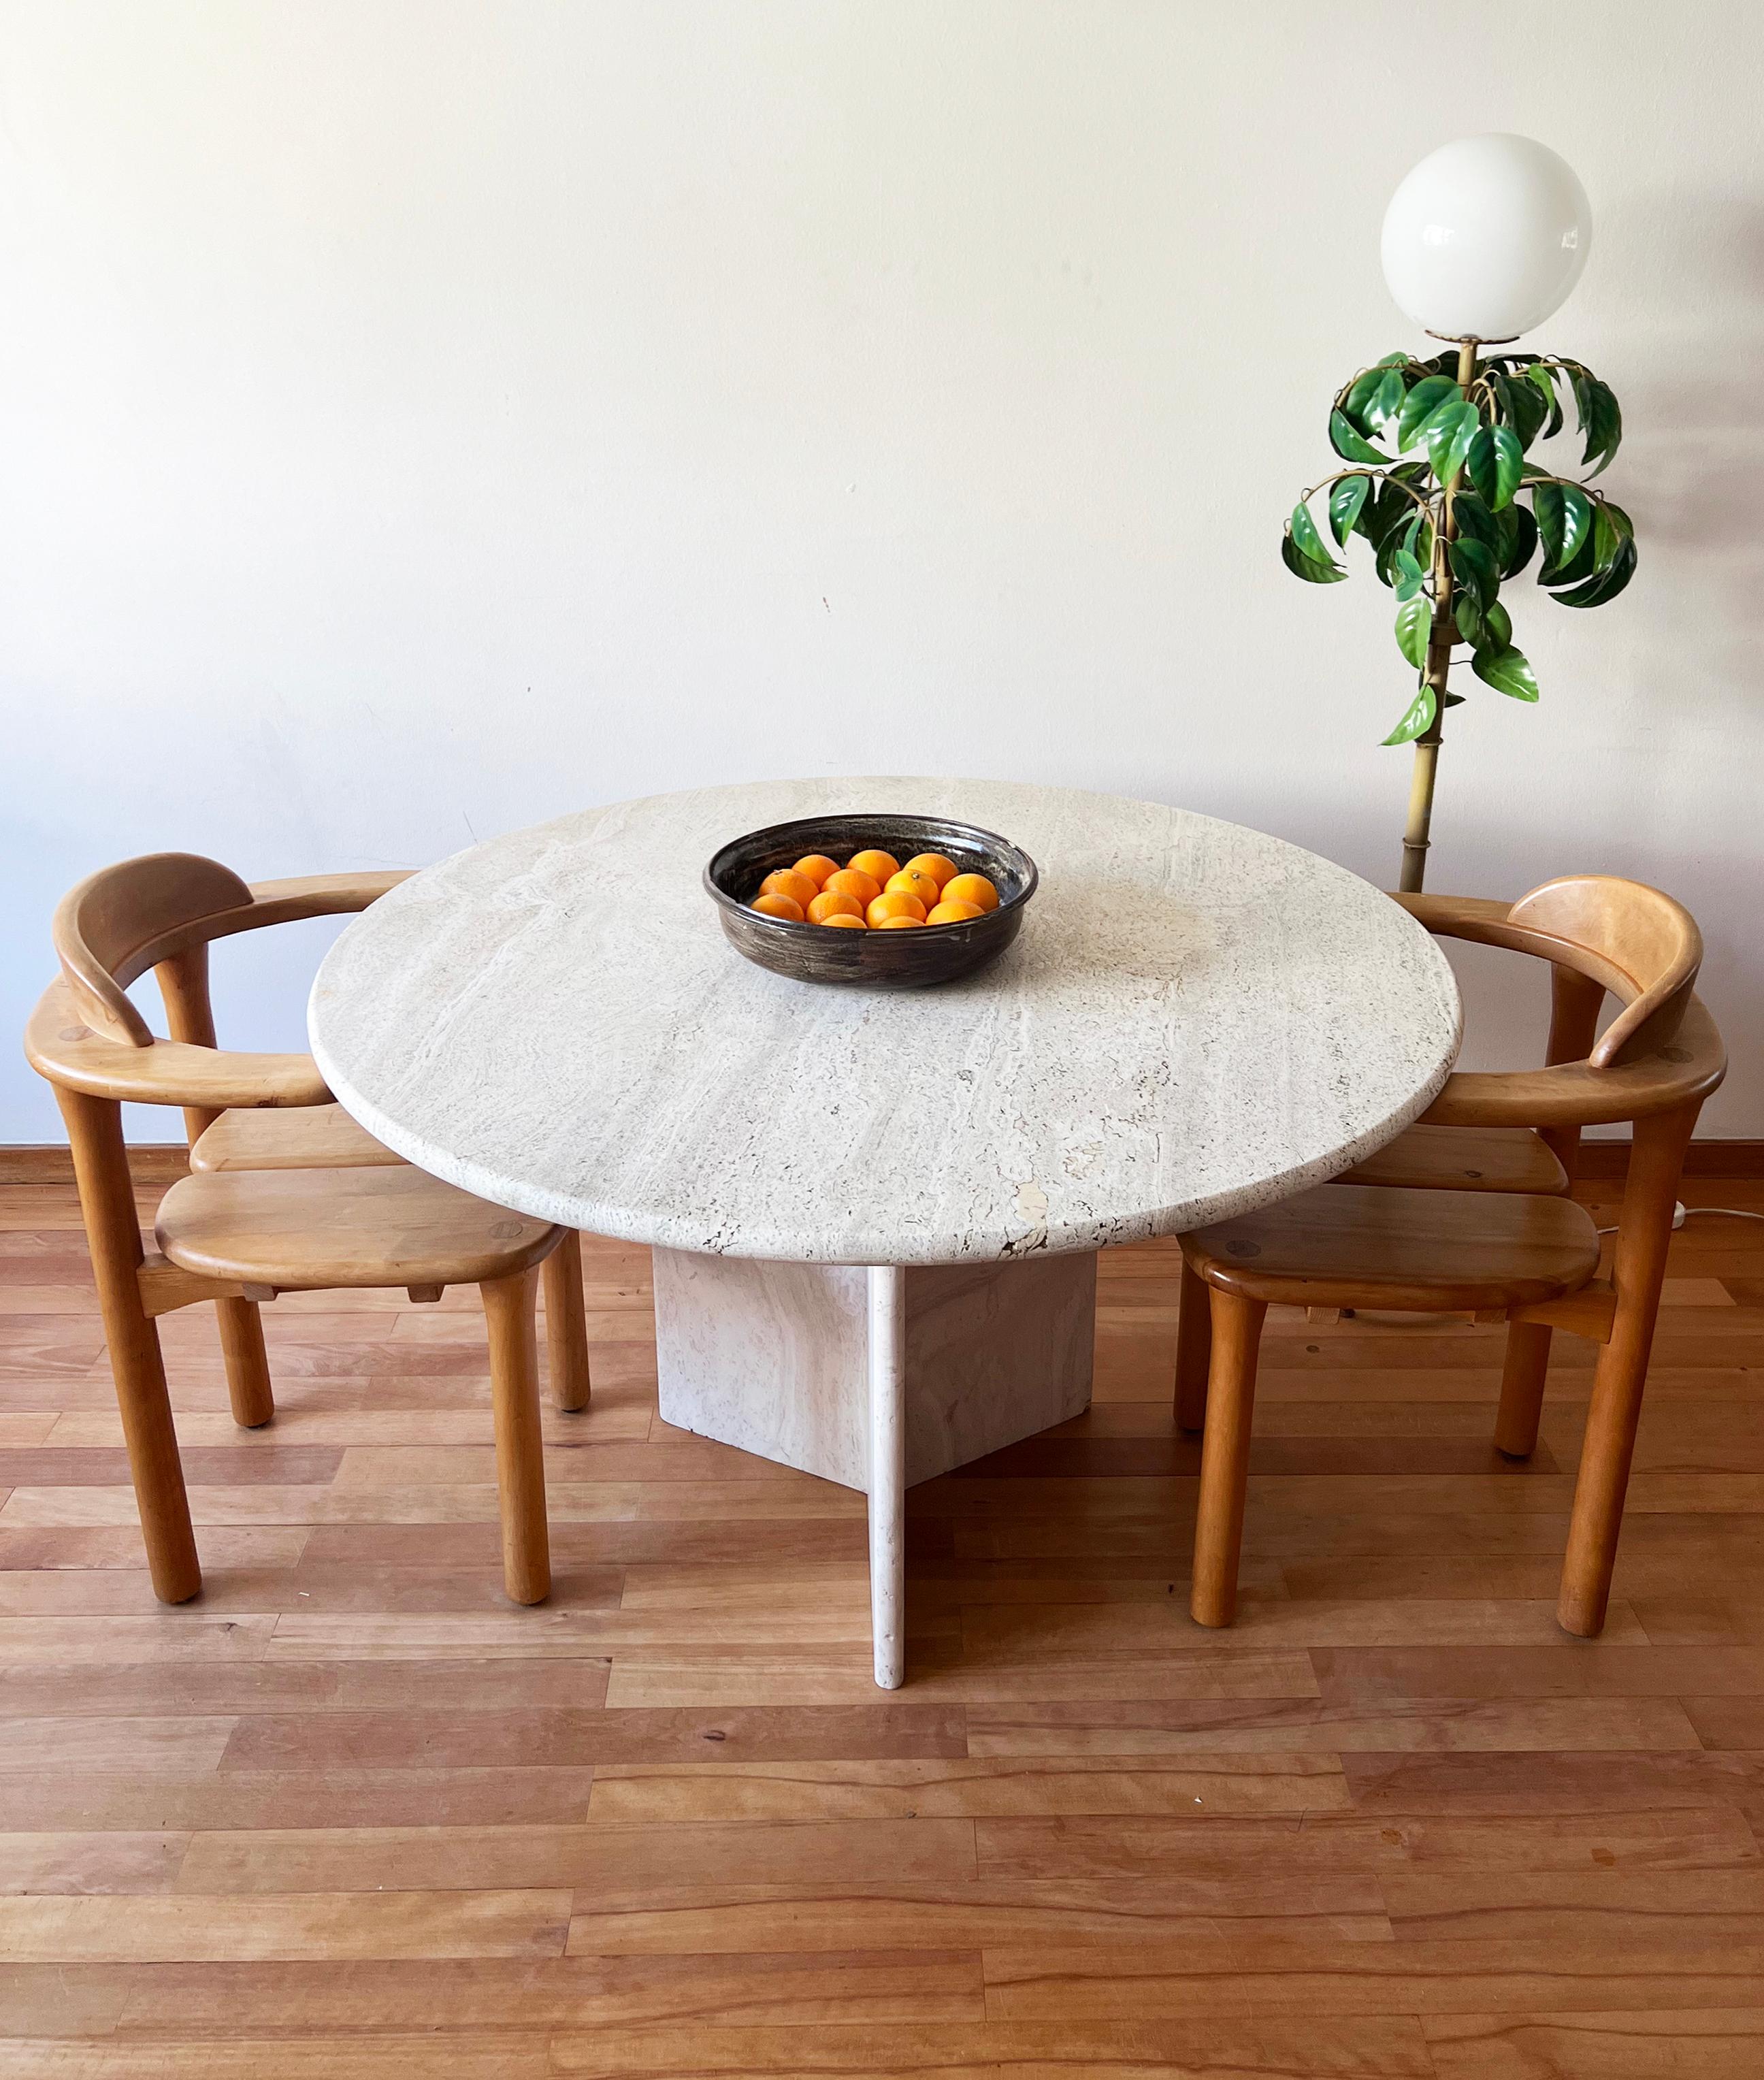 One of a kind Postmodern Italian designer 1970s off white round Solid travertine dining table with sculptural pedestal signature base

This table and base are In very good vintage condition, original from the 1970s.  

gorgeous in person

Gorgeous